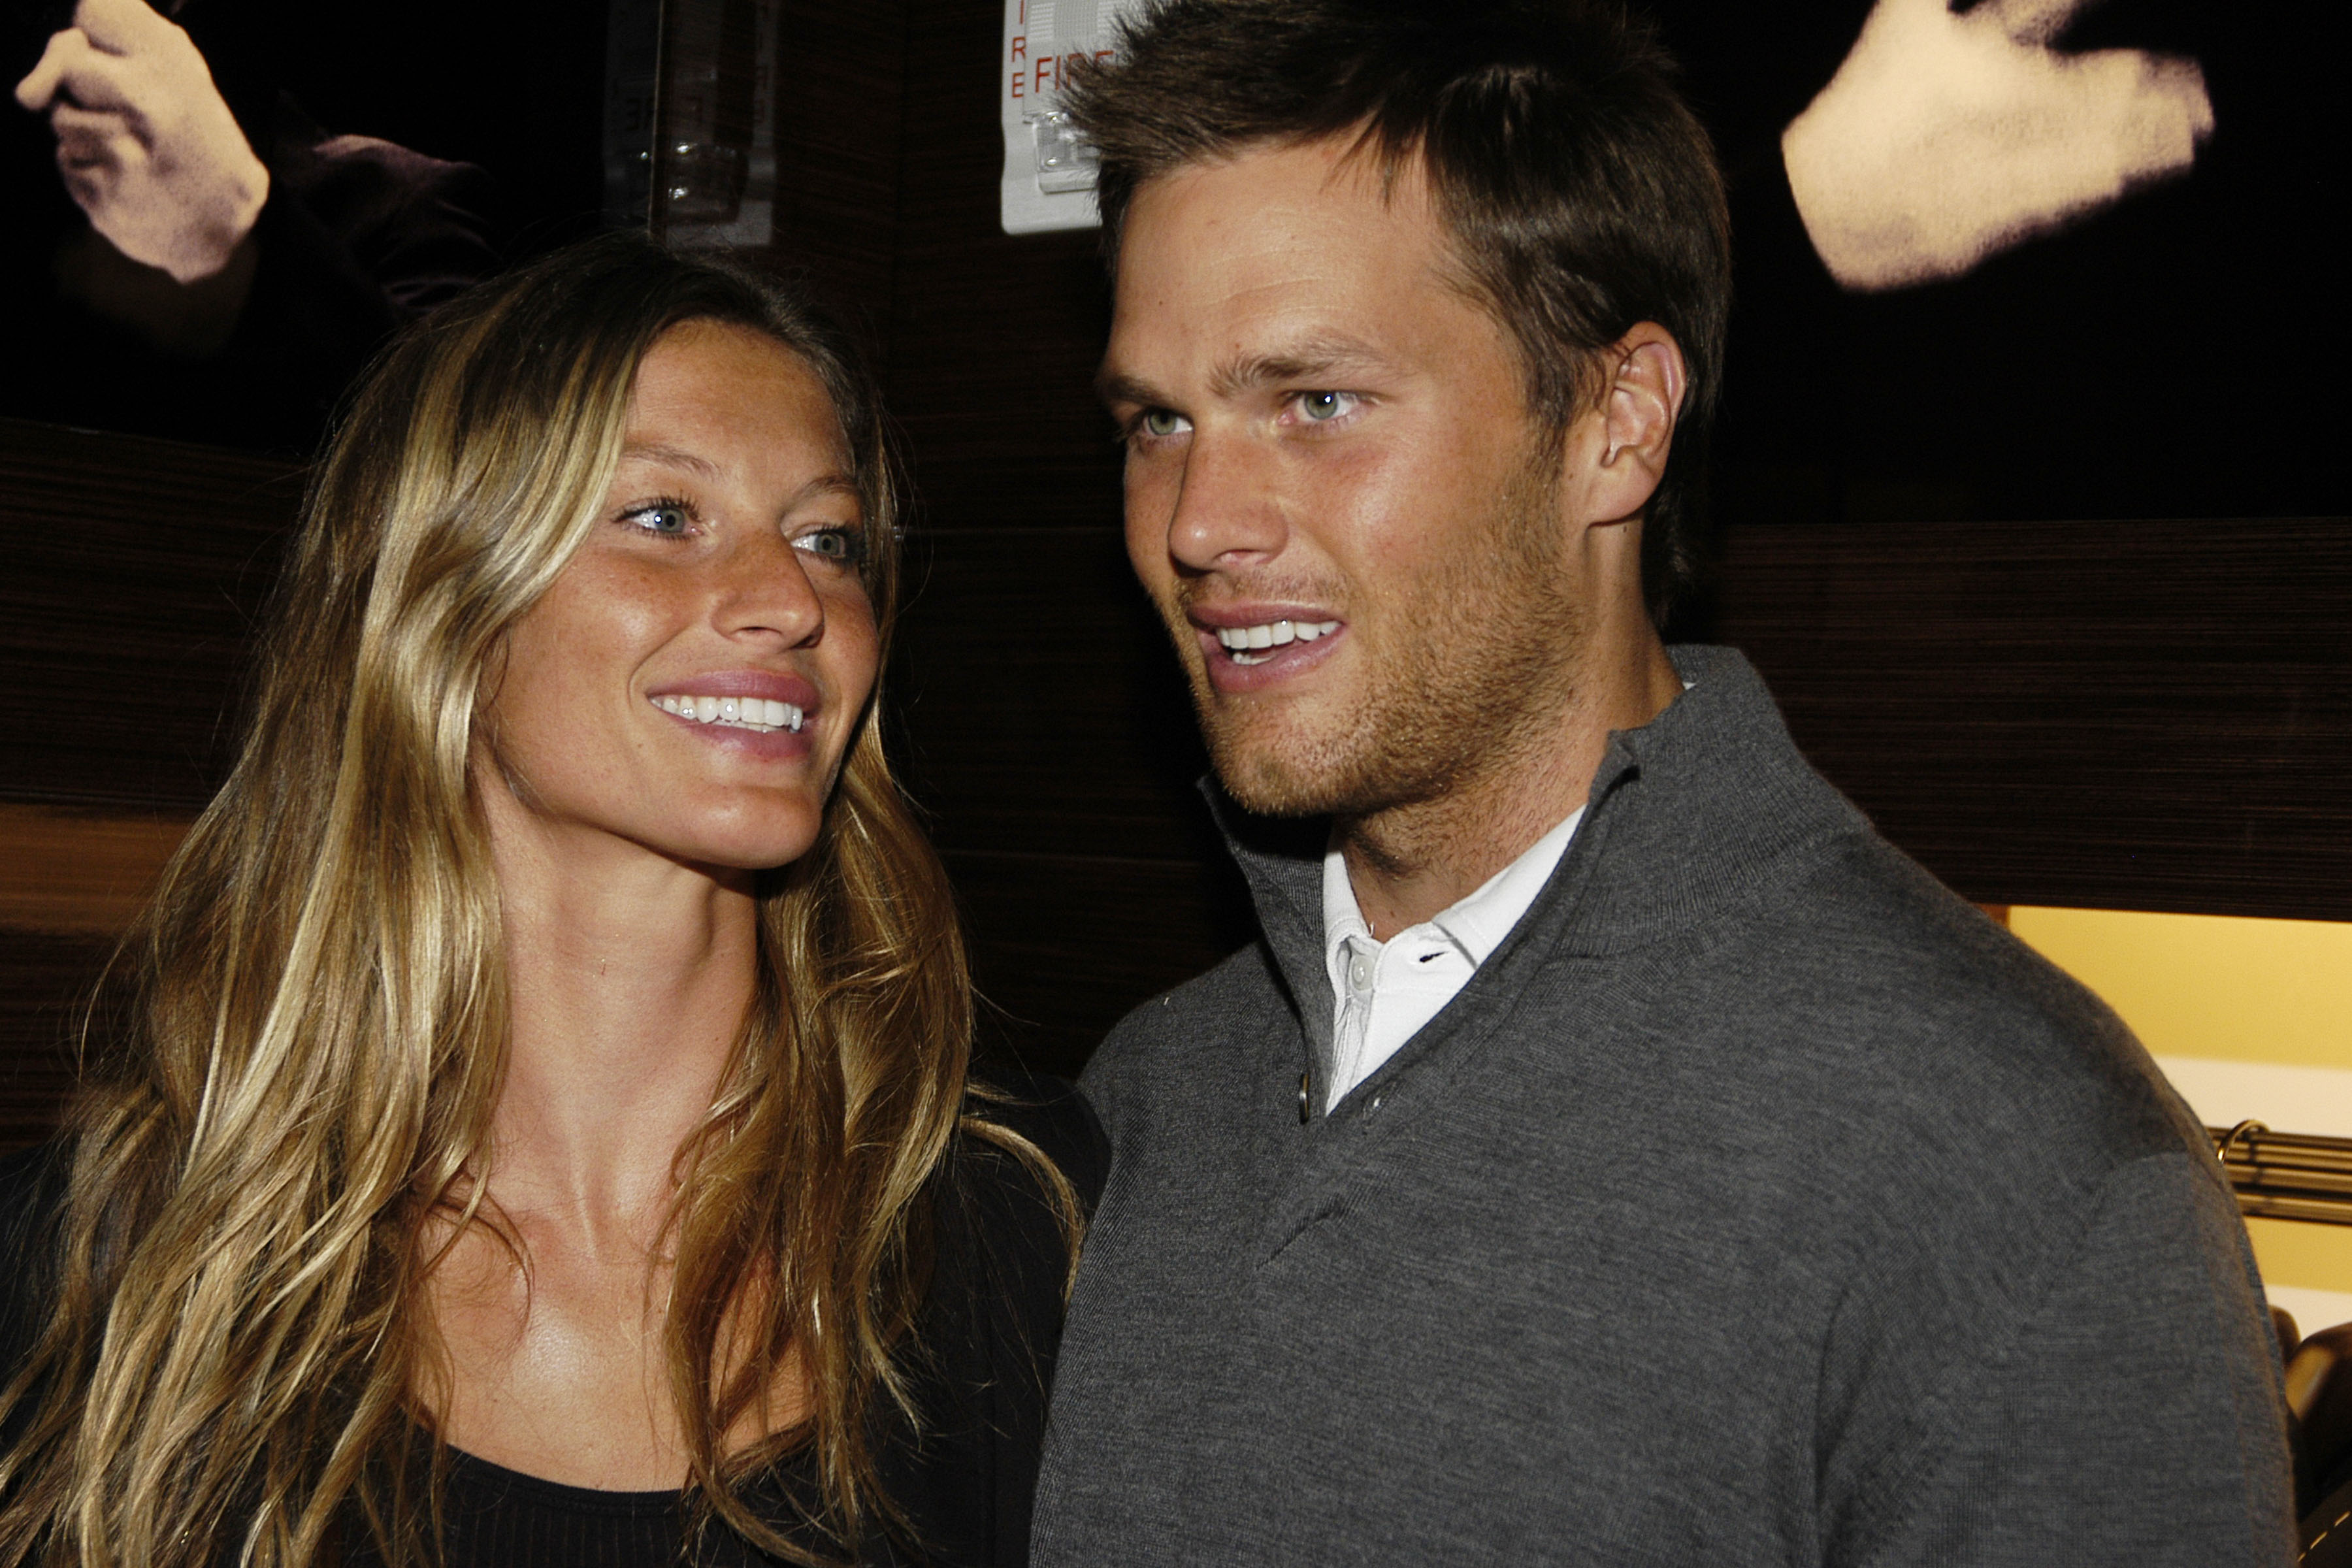 Gisele Bündchen and Tom Brady in New York City on March 11, 2008 | Source: Getty Images